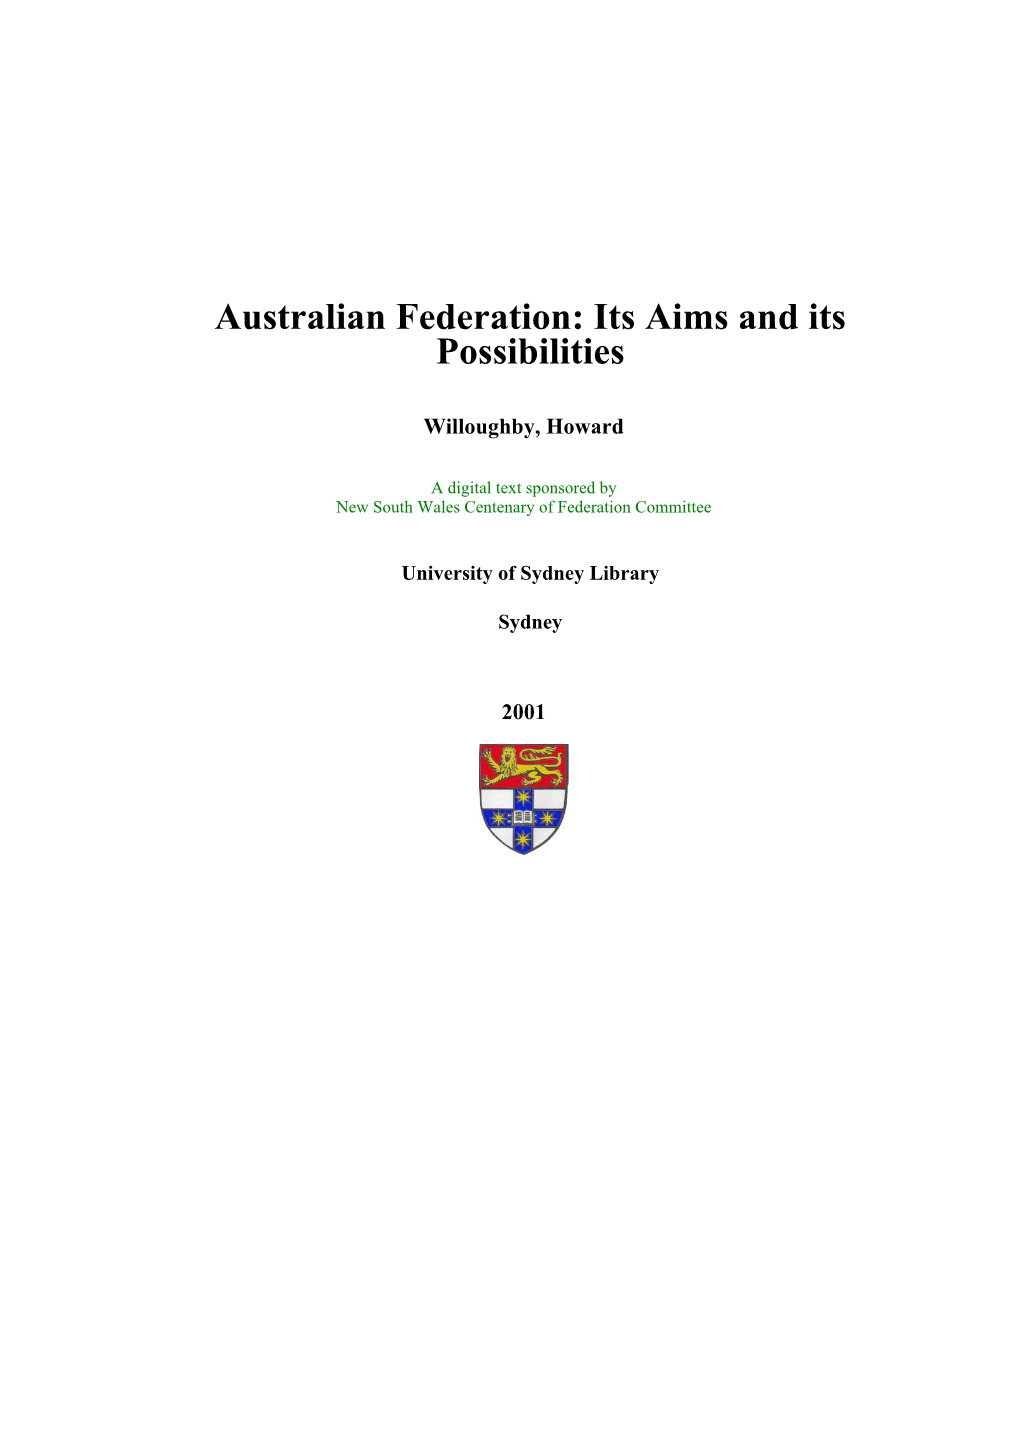 Australian Federation: Its Aims and Its Possibilities